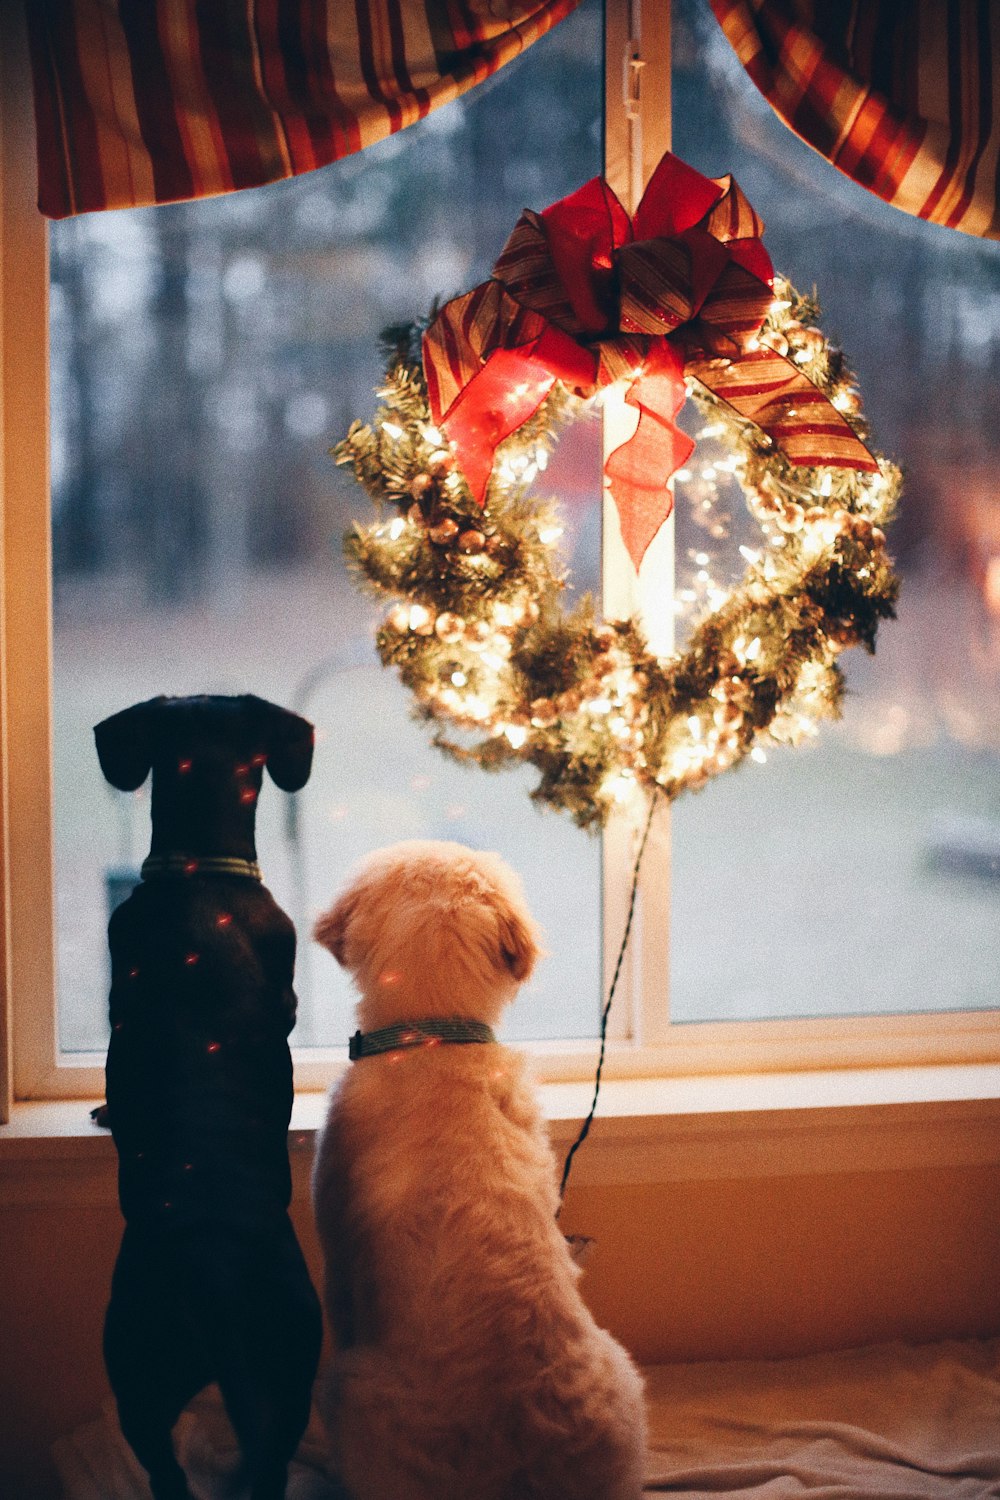 two black and white dogs near lighted wreath